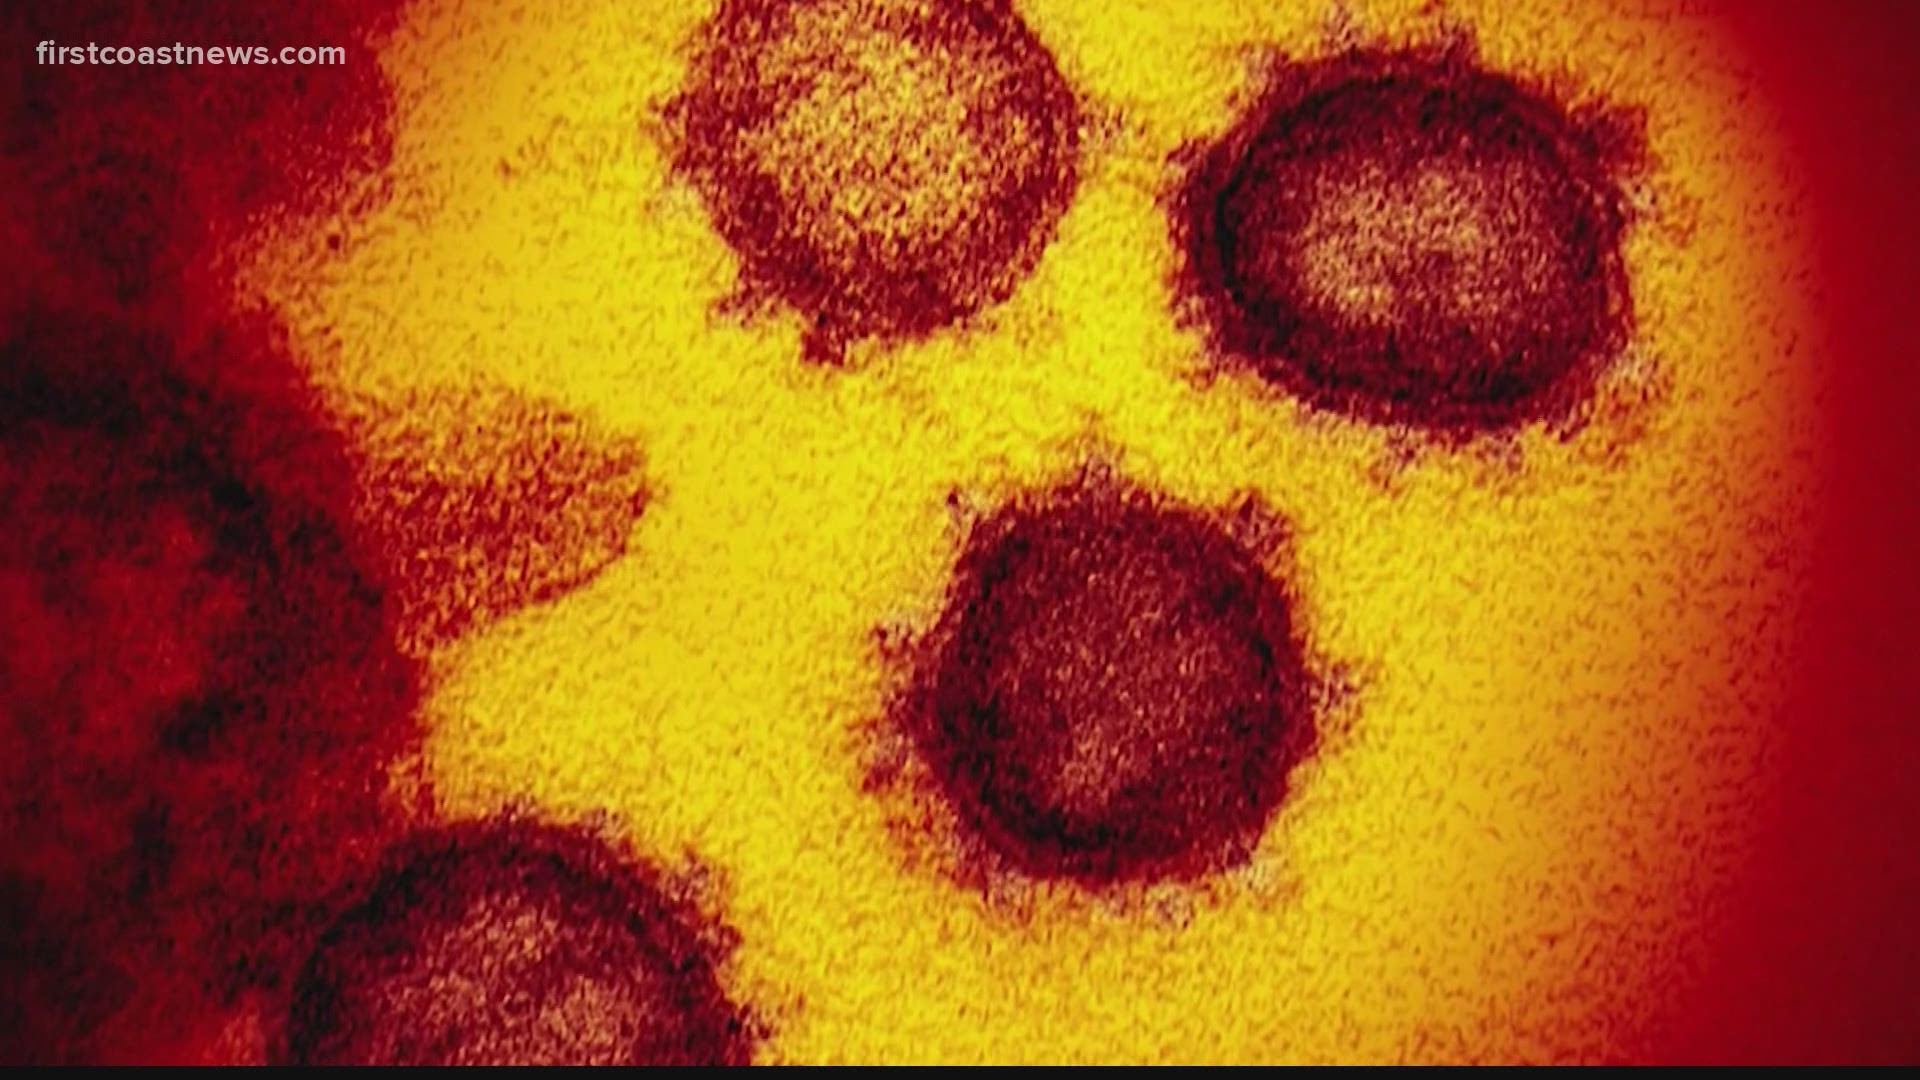 The Delta variant is now the most common strain of COVID-19 nationwide. However, it is unclear how many people are infected with the variant in NE Florida.